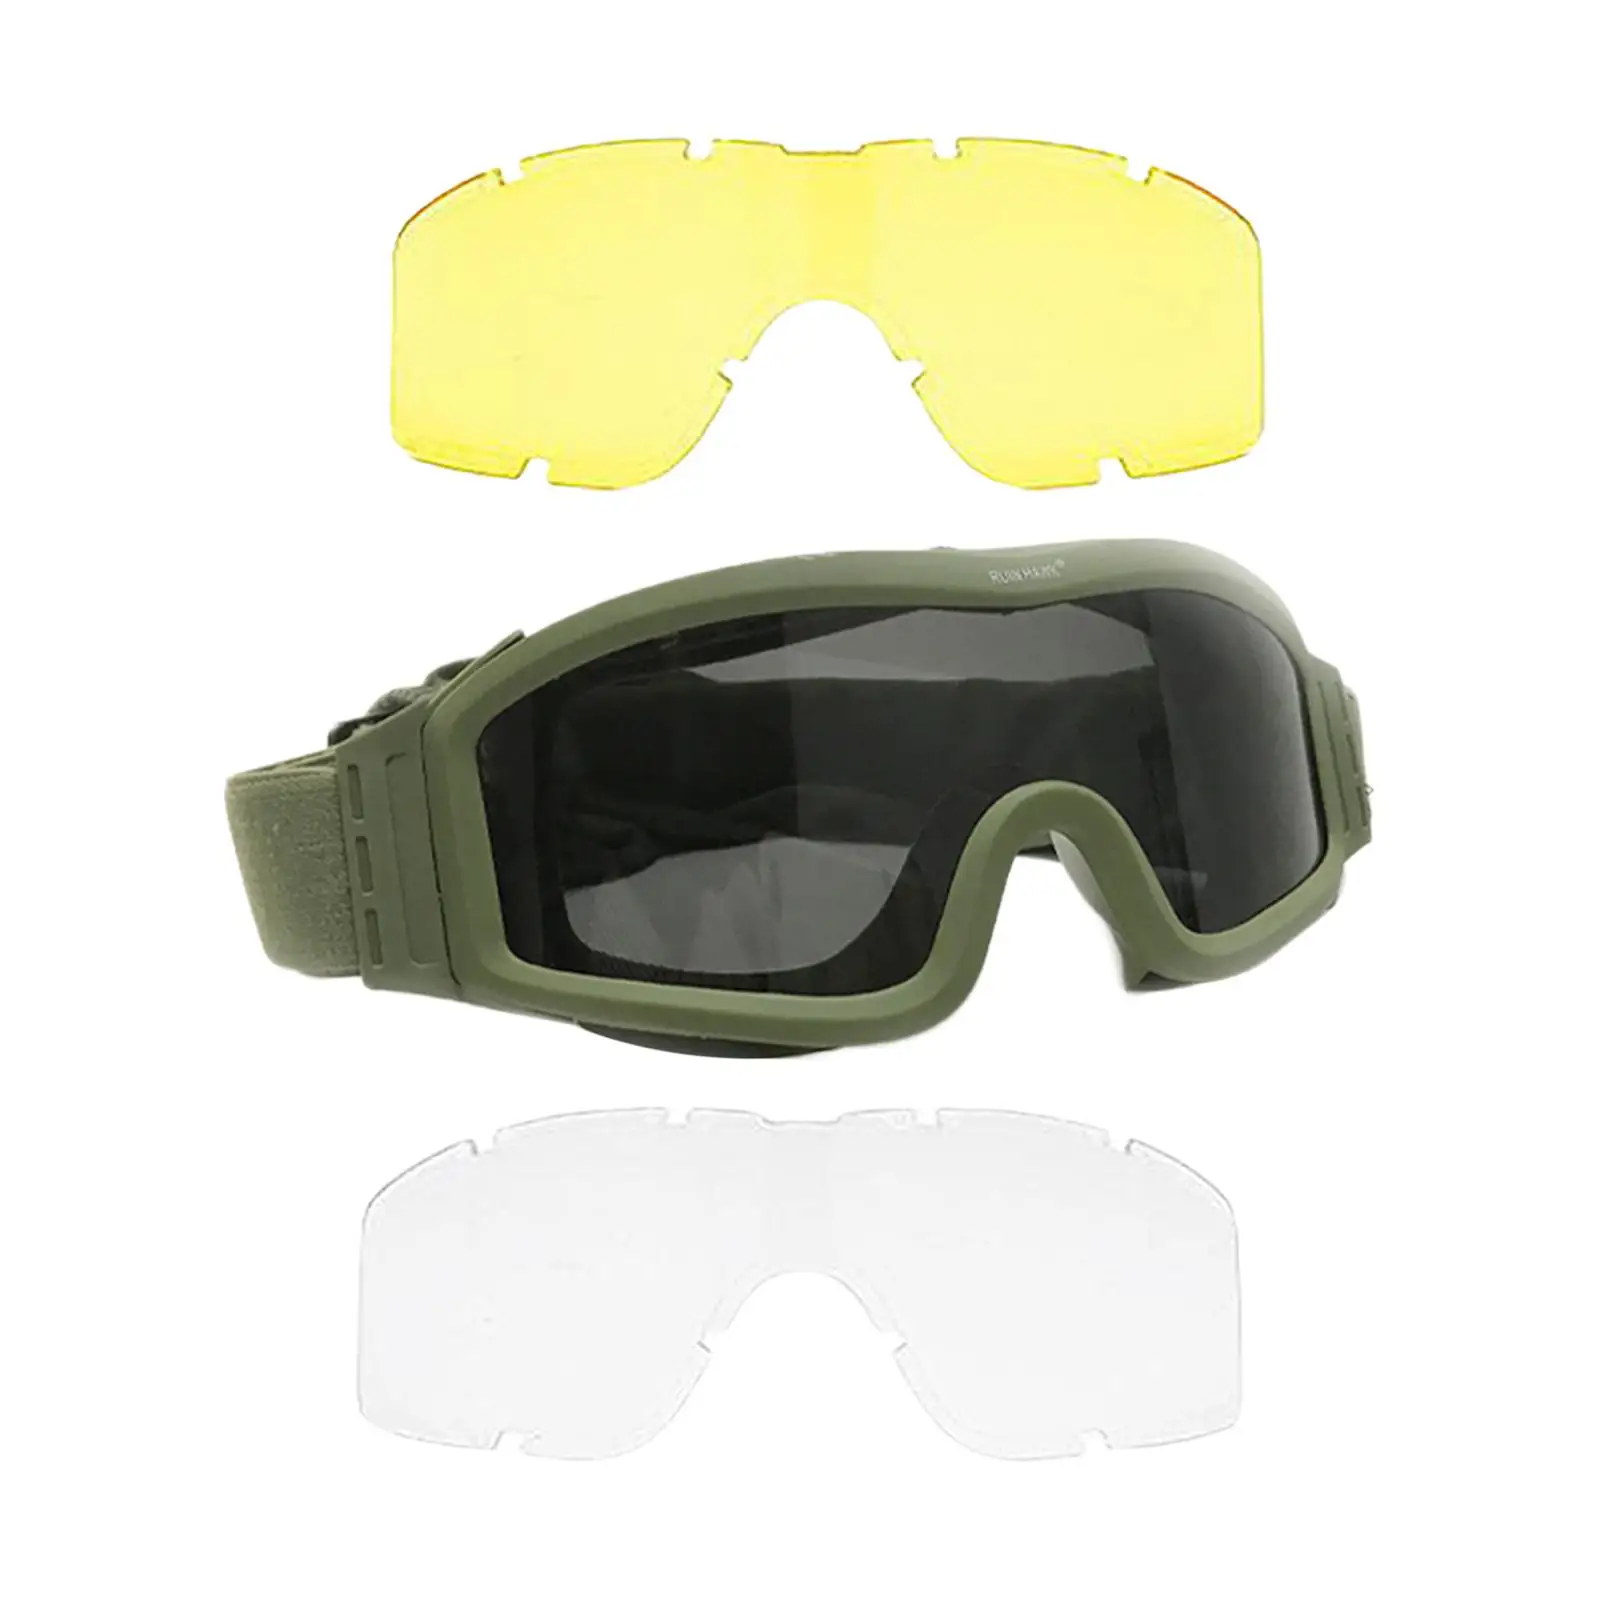 3 Lens Goggles Glasses Windproof Outdoor Adjustable Scratch Resistant Anti UV for Desert Biking Hunting Mountaineering Shooting